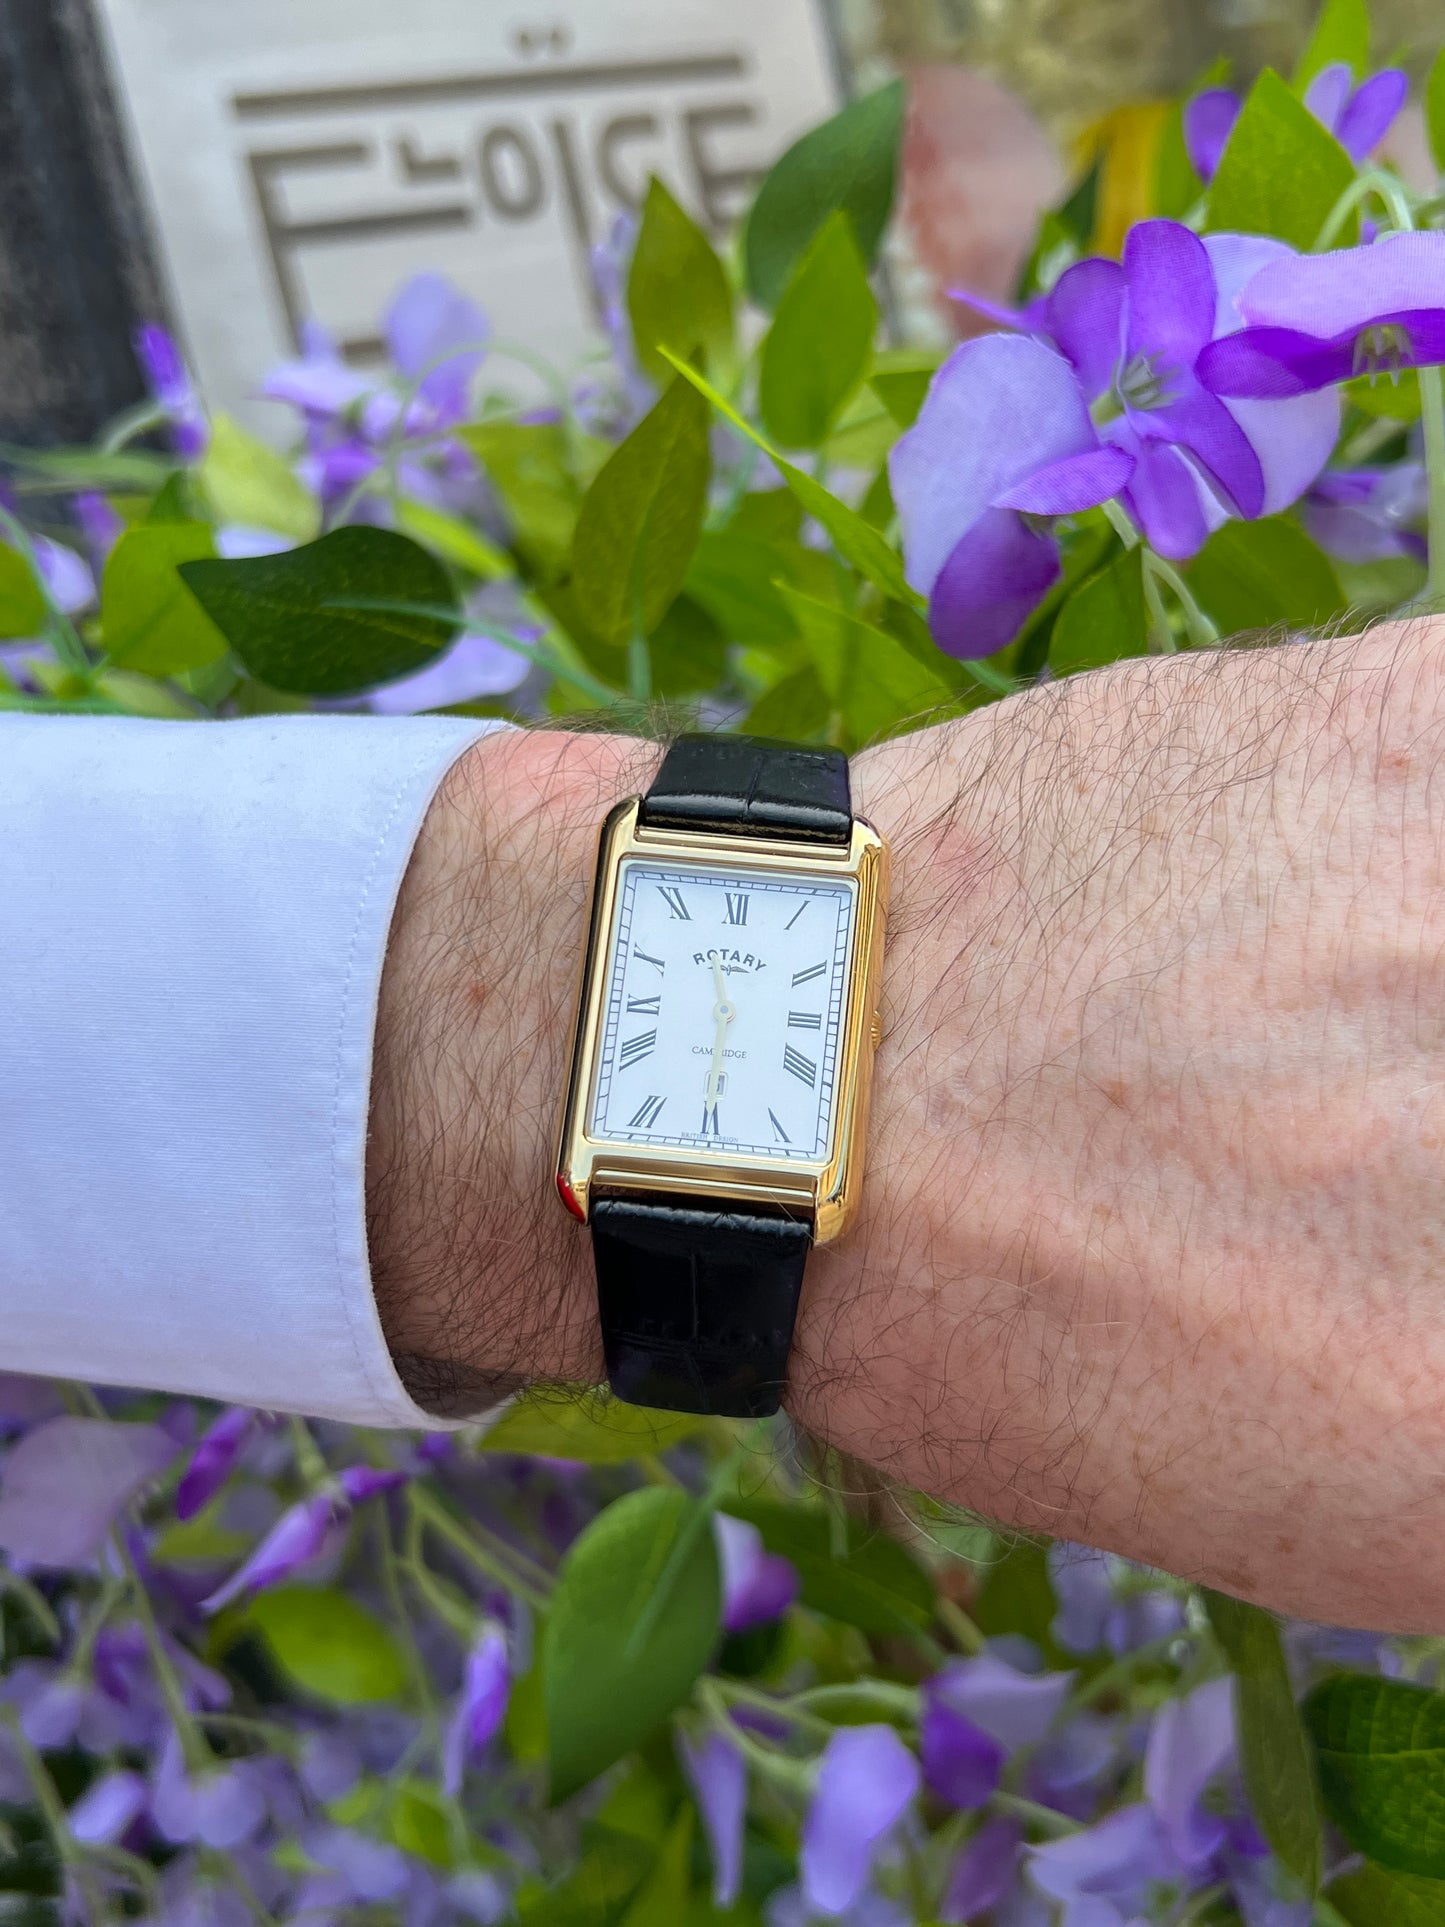 Rotary Gold Cambridge Gents Watch